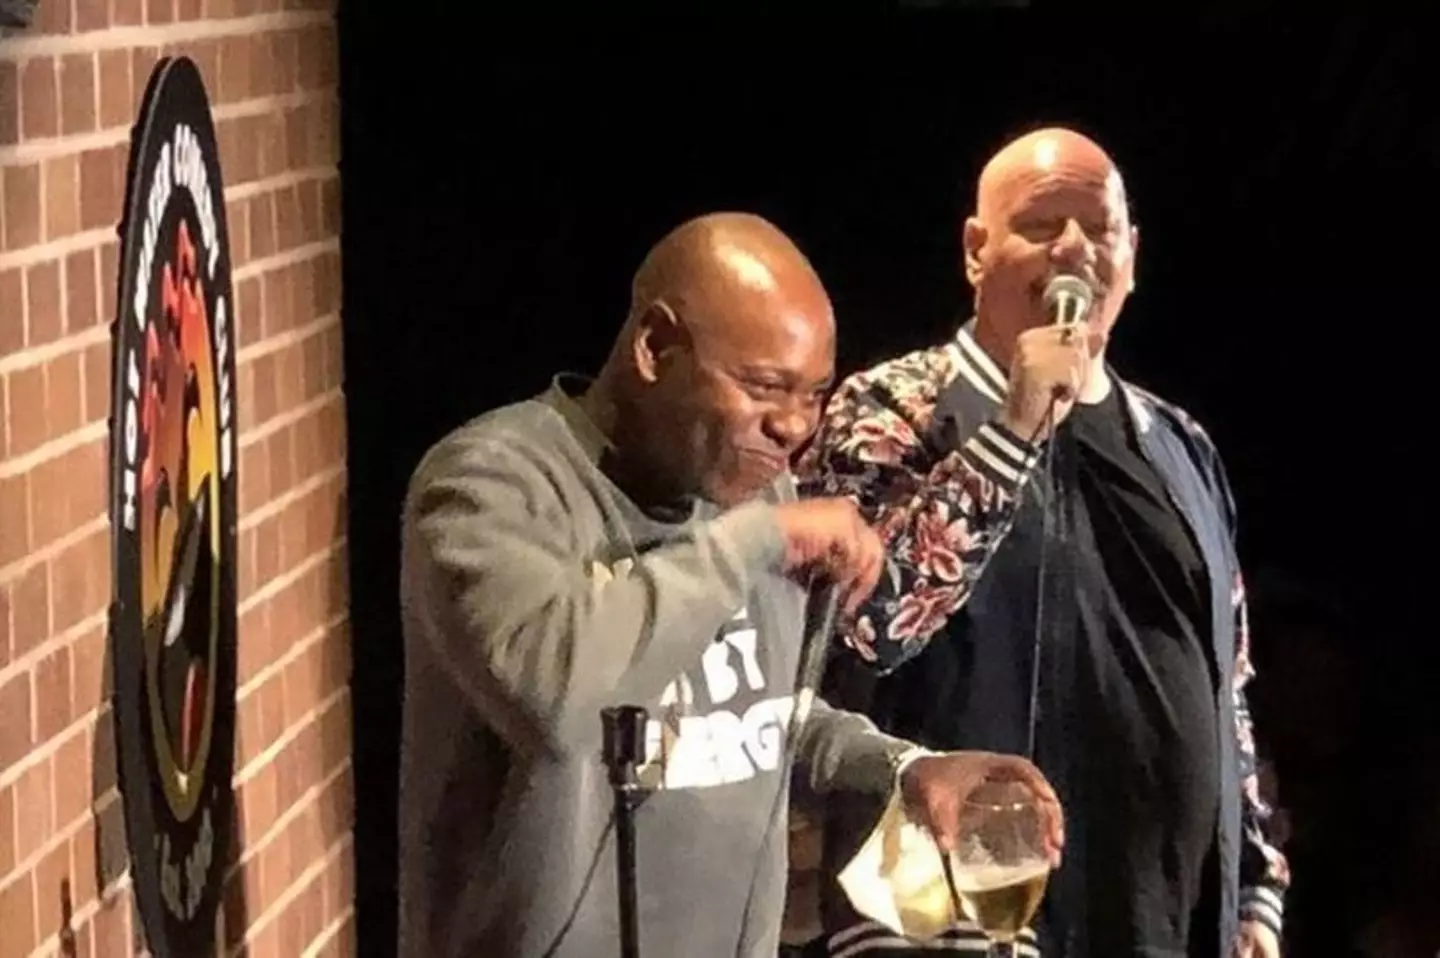 Dave Chappelle and Jeff Ross in Liverpool last night.